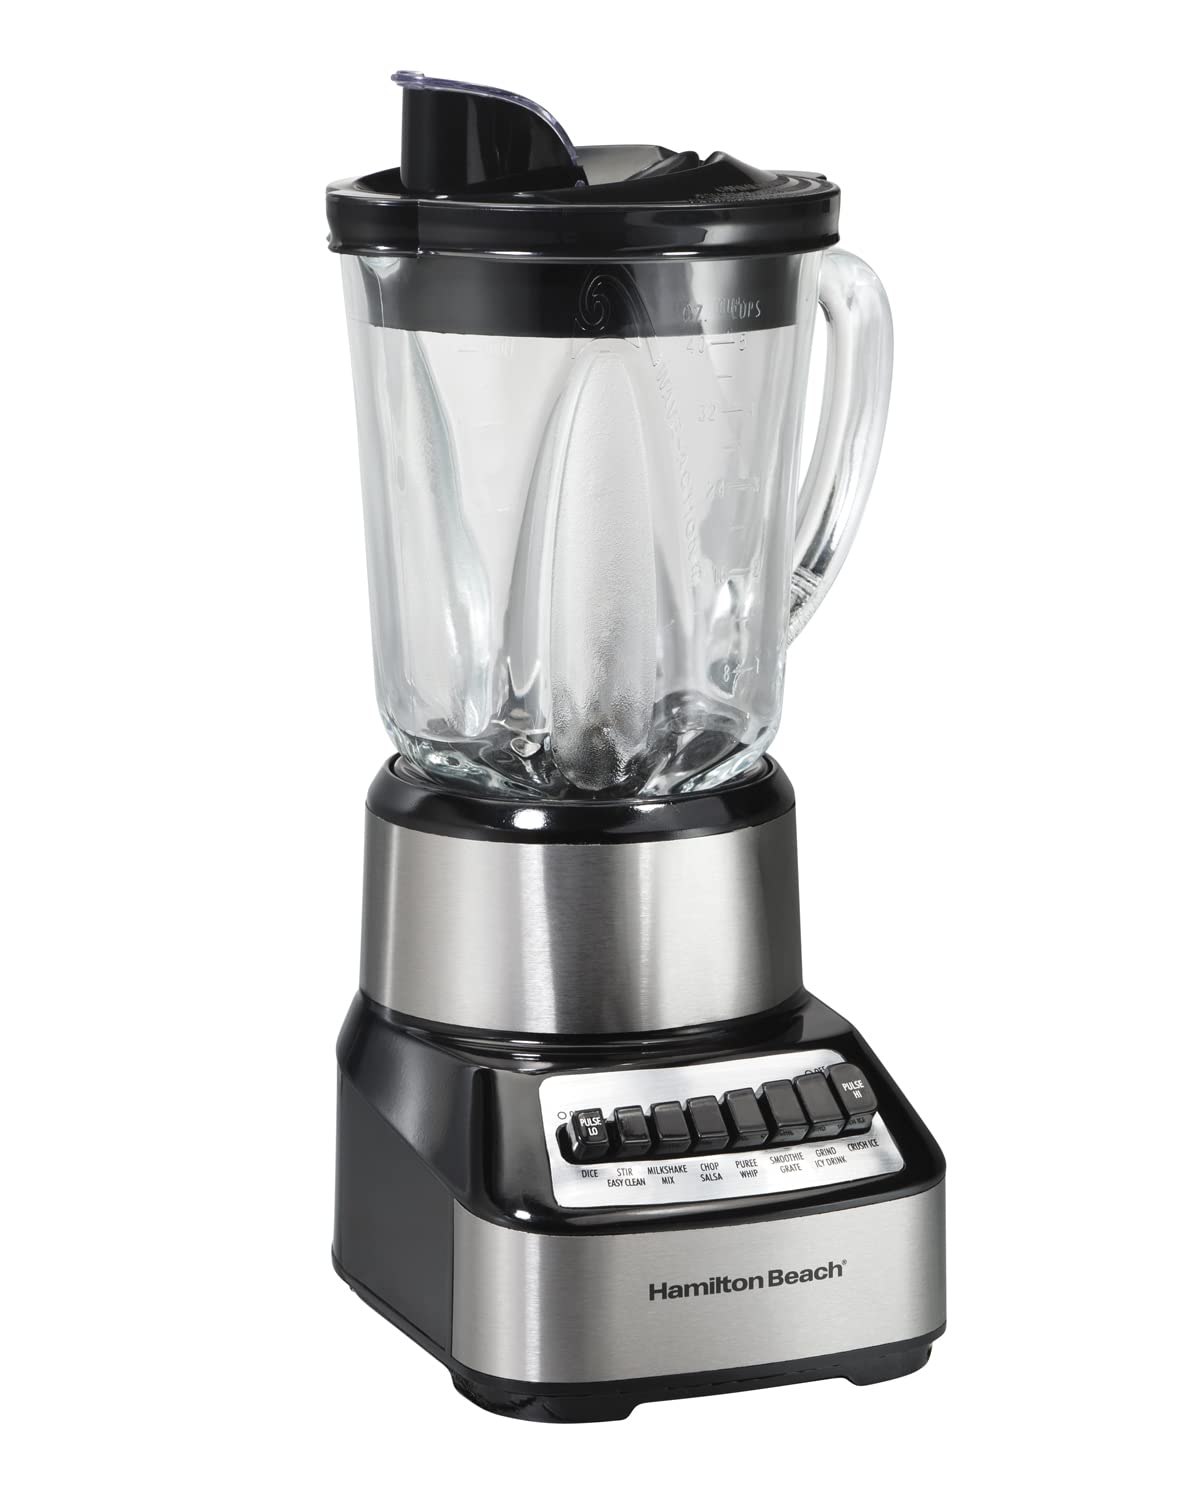 Hamilton Beach Electric Stand Mixer, 4 Quarts, Dough Hook, Flat Beater Attachments, Splash Guard 7 Speeds & Wave Crusher Blender with 40 Oz Glass Jar and 14 Functions for Puree, Stainless Steel